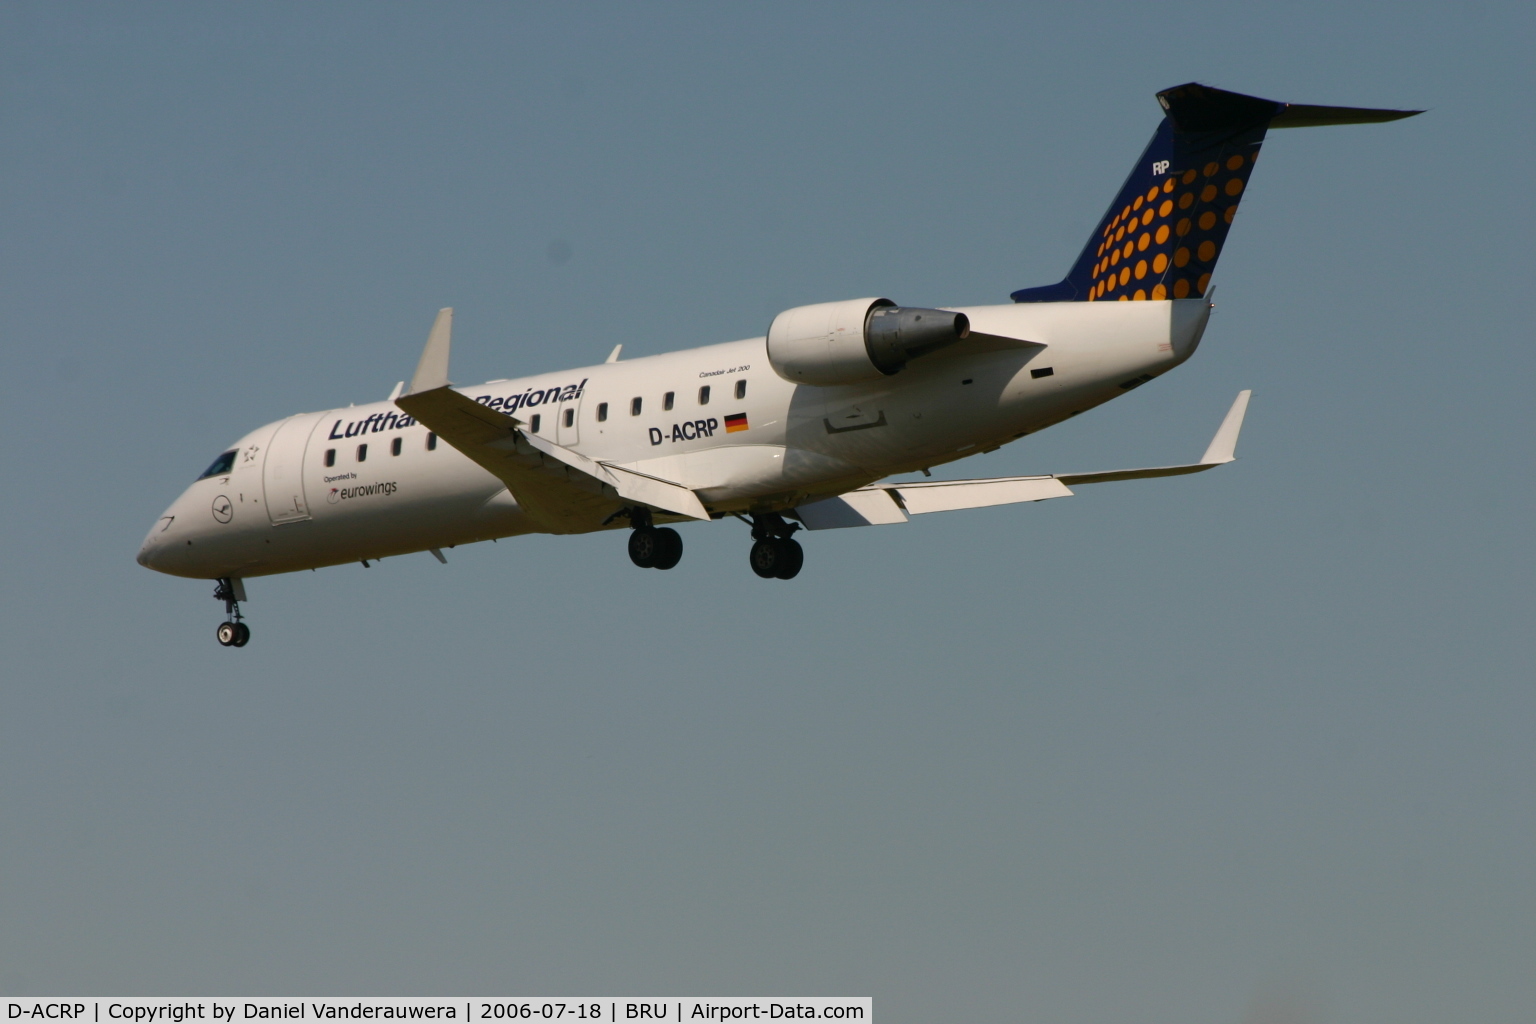 D-ACRP, 2002 Bombardier CRJ-200ER (CL-600-2B19) C/N 7625, flight LH4632 is about to land on rwy 25L